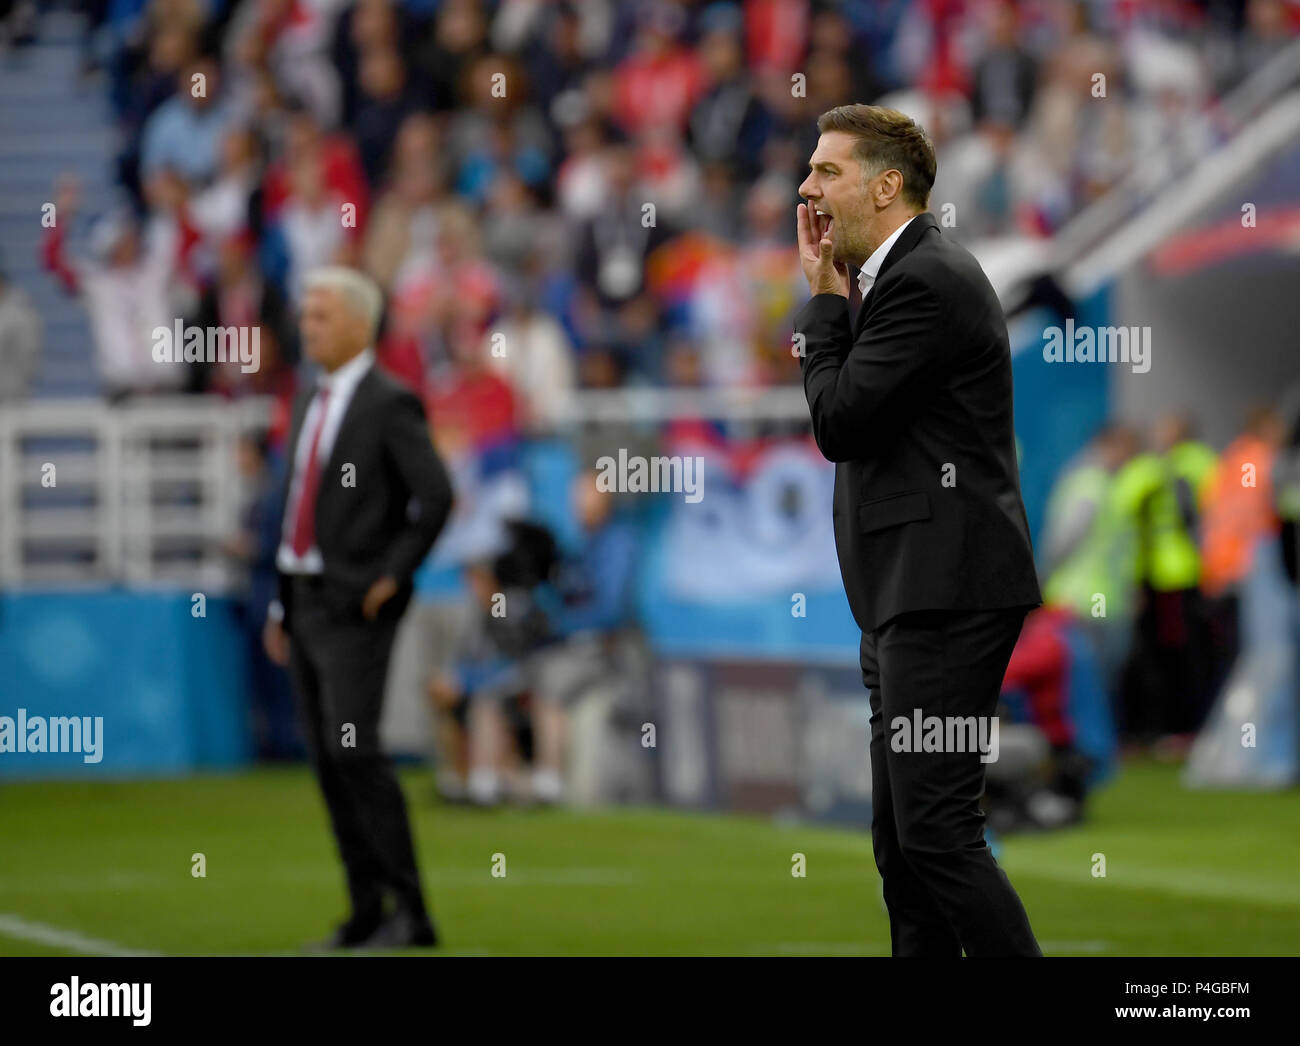 Kaliningrad, Russia. 22nd June, 2018. Serbia's head coach Mladen Krstajic gives instructions to players during the 2018 FIFA World Cup Group E match between Switzerland and Serbia in Kaliningrad, Russia, June 22, 2018. Credit: Chen Cheng/Xinhua/Alamy Live News Stock Photo